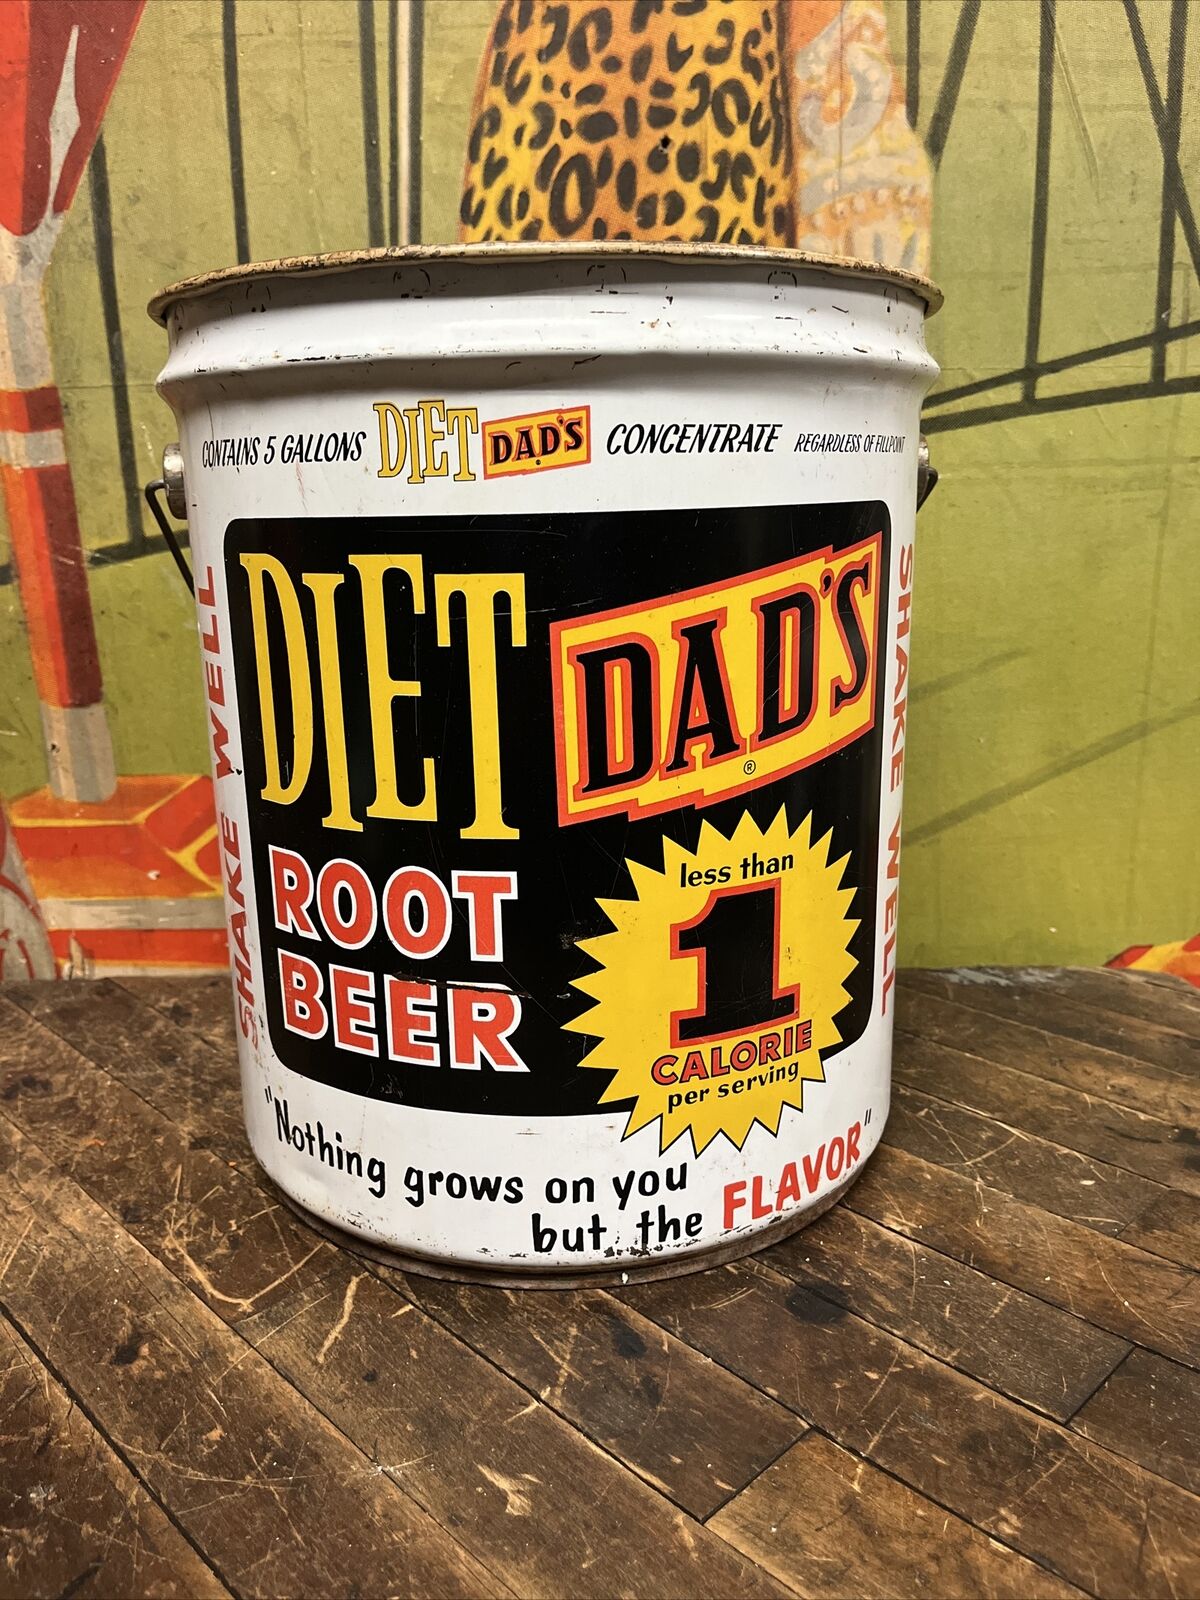 VINTAGE 1968 DIET DADS ROOT BEER 5 GALLON SYRUP CAN DRUM SIGN COCA COLA 7UP DP